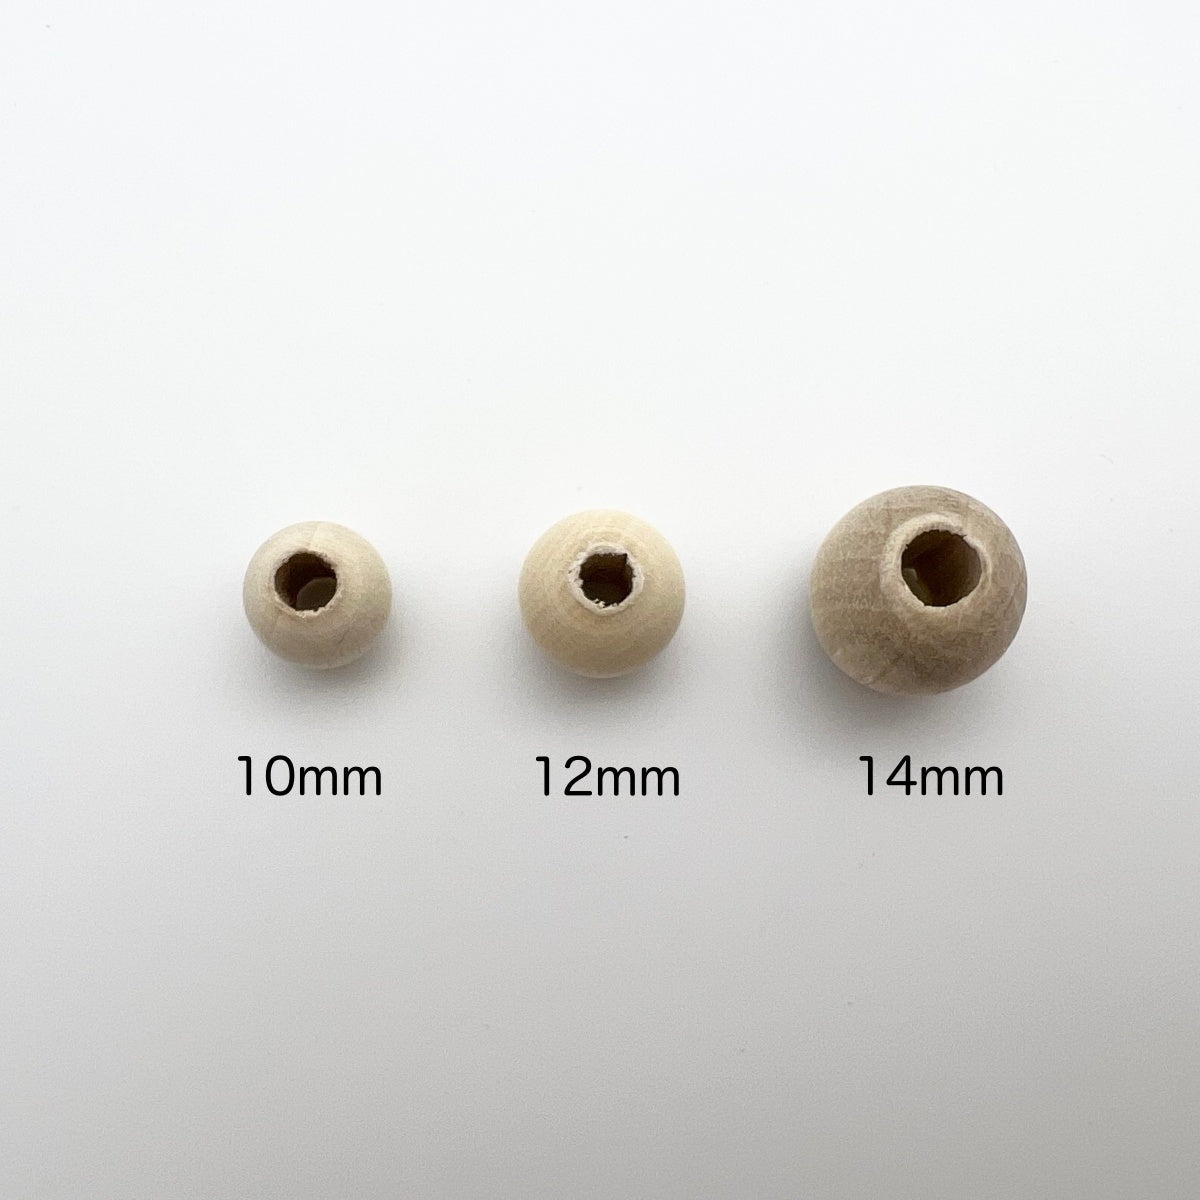 Original Wood Beads [10mm(hole diameter about 4mm) / 20pieces / Natural] made in Japan